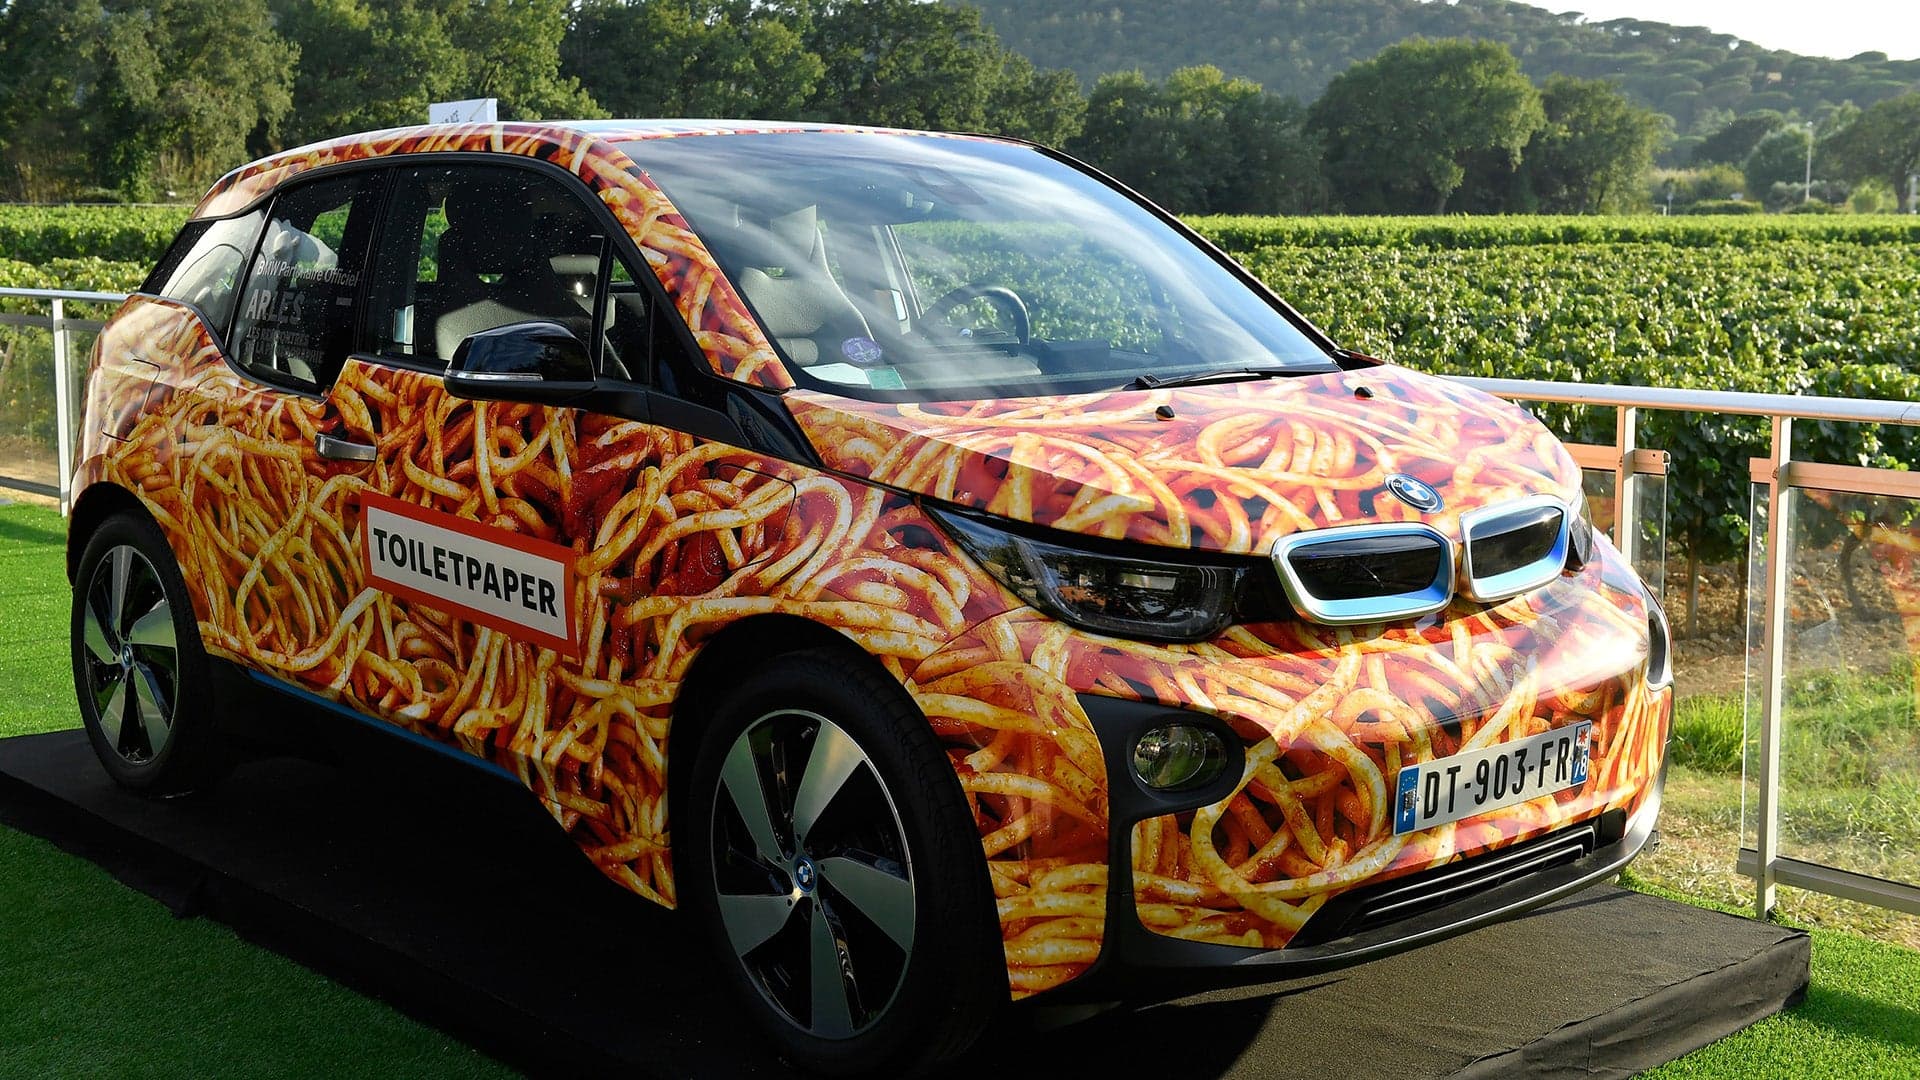 Someone Bought the BMW ‘Spaghetti Car’ for $117,000